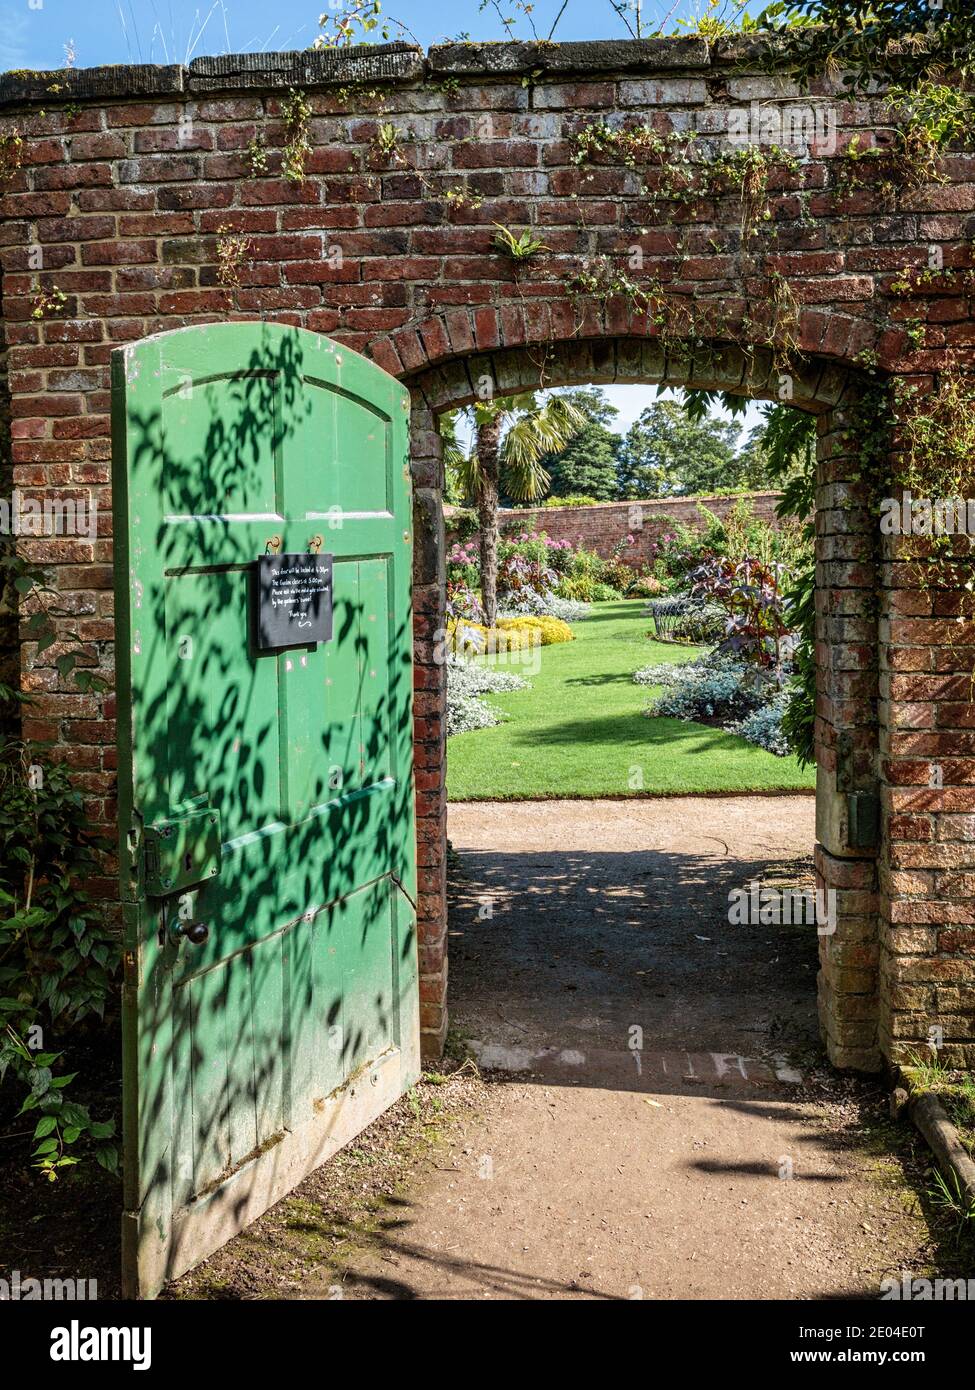 Doorway to the walled garden at Calke Abbey, a grade I listed early 18th century country house near Ticknall, Derbyshire, England, UK Stock Photo